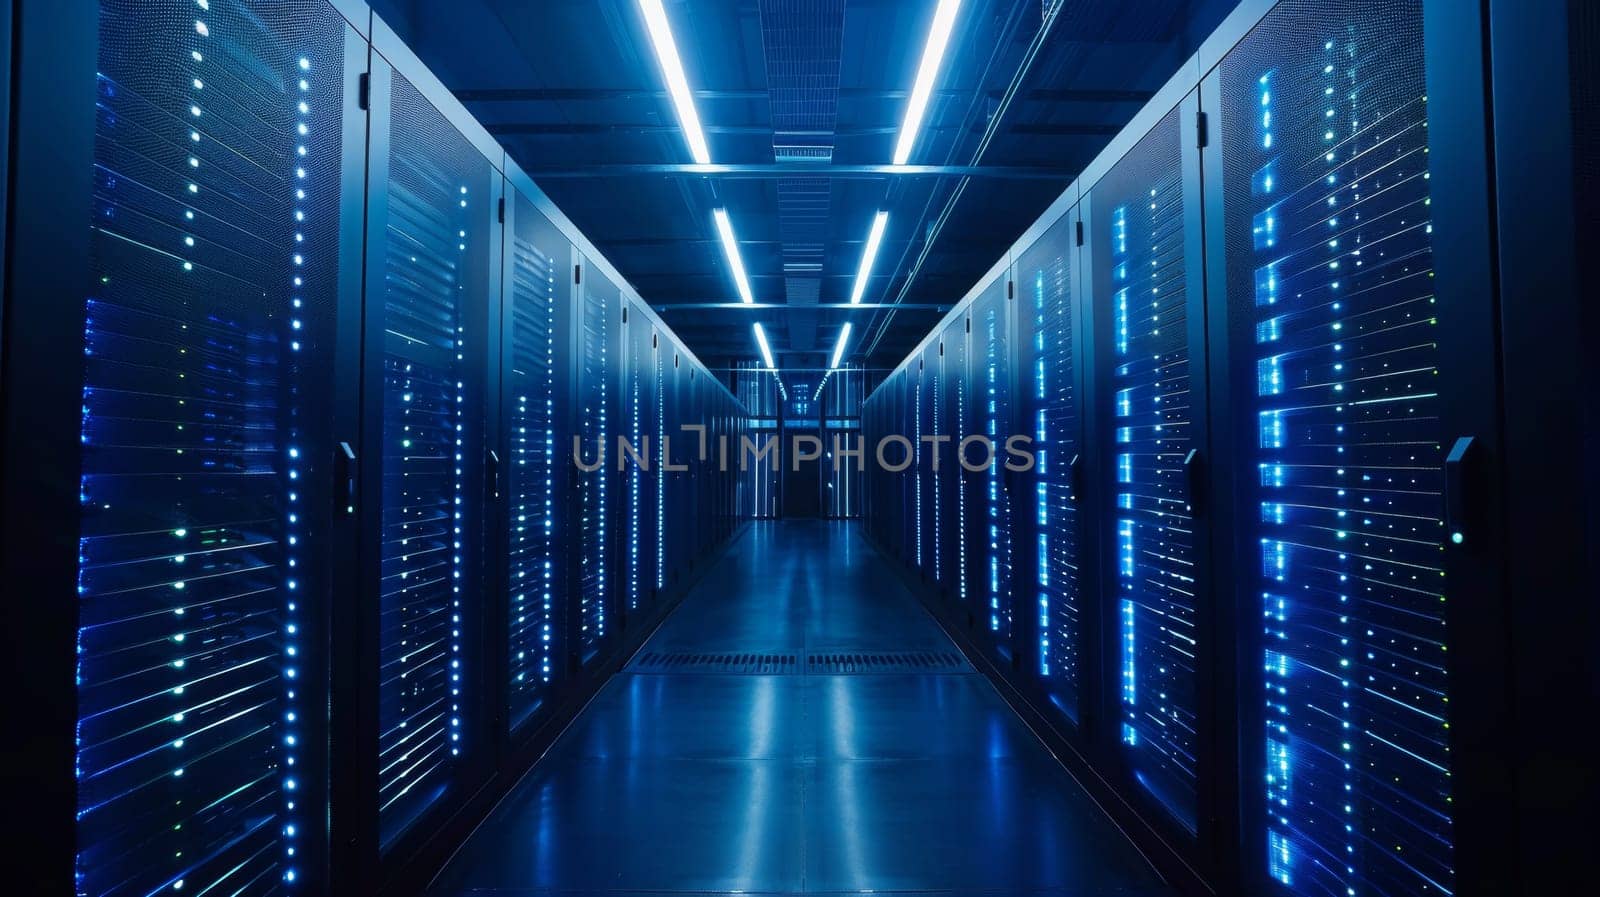 A long hallway with rows of servers and blue lights